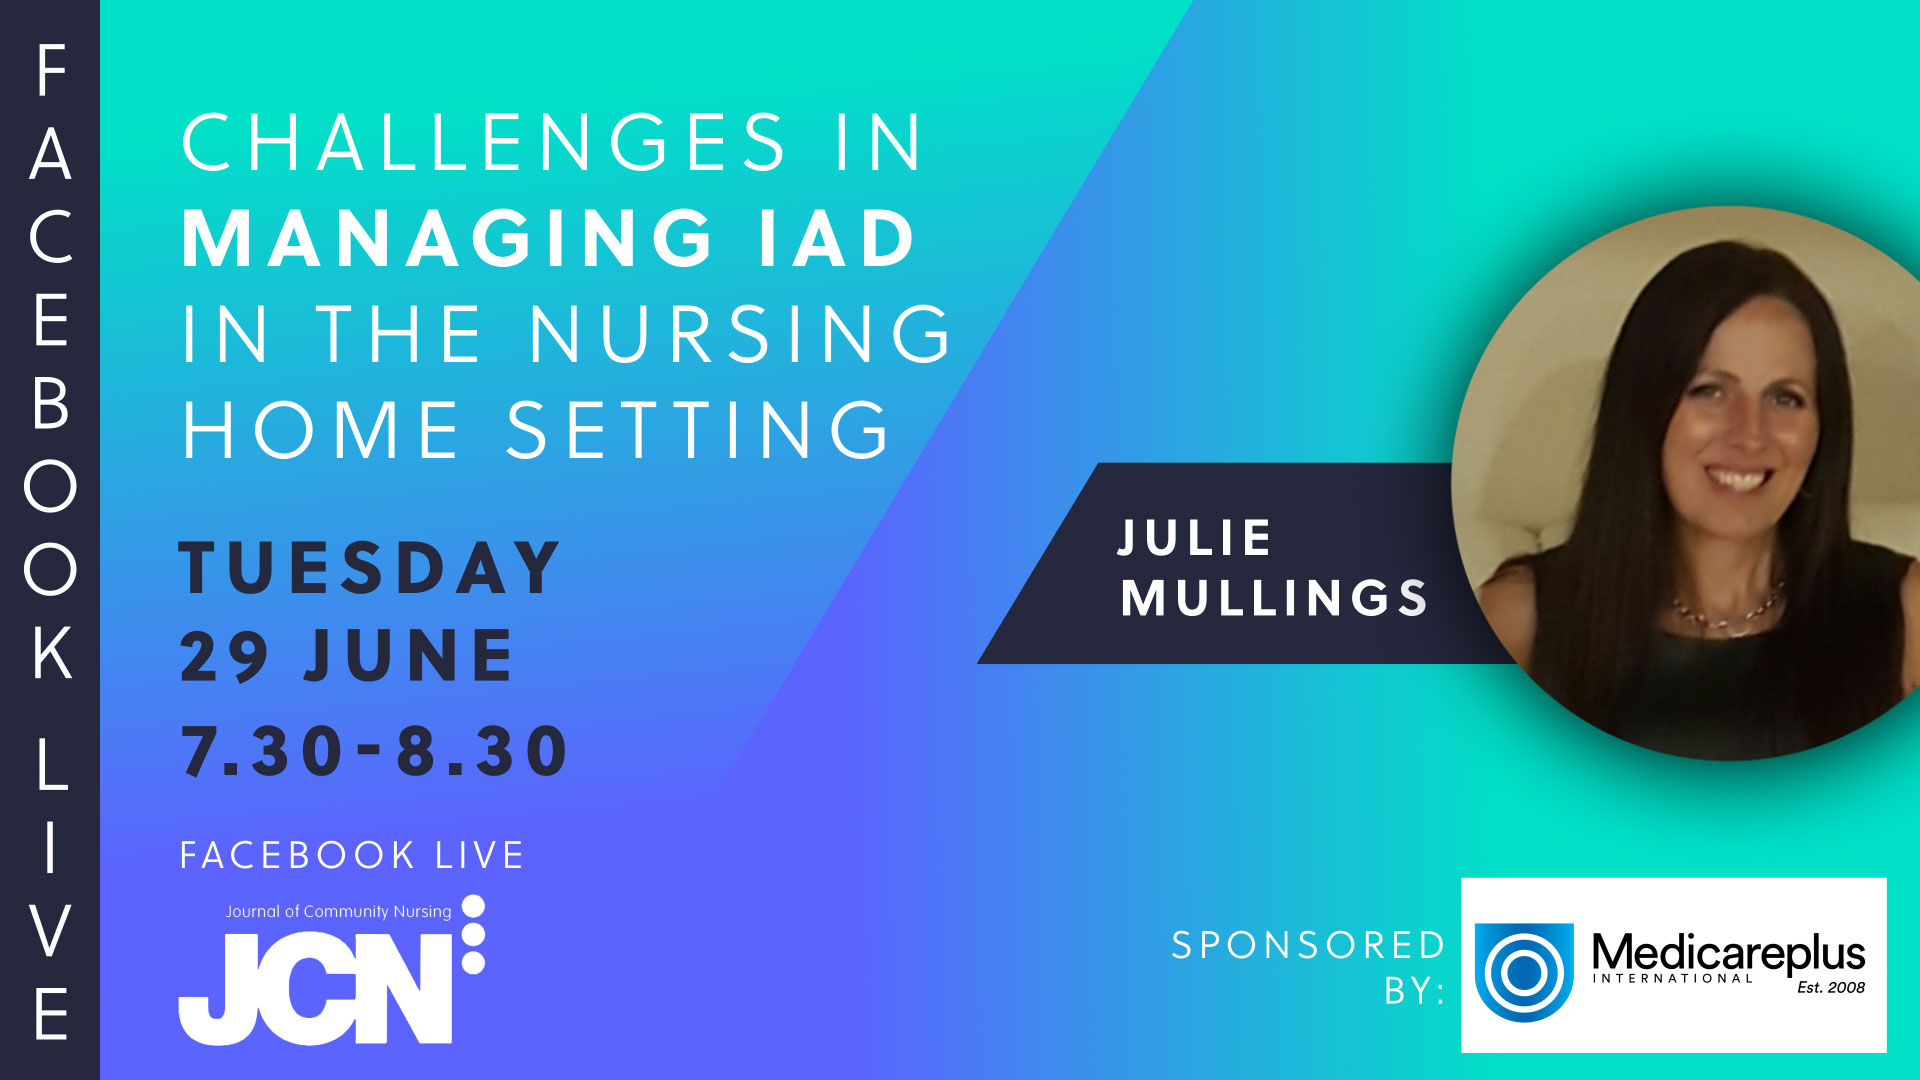 Facebook Live: Challenges in managing IAD in the nursing home setting